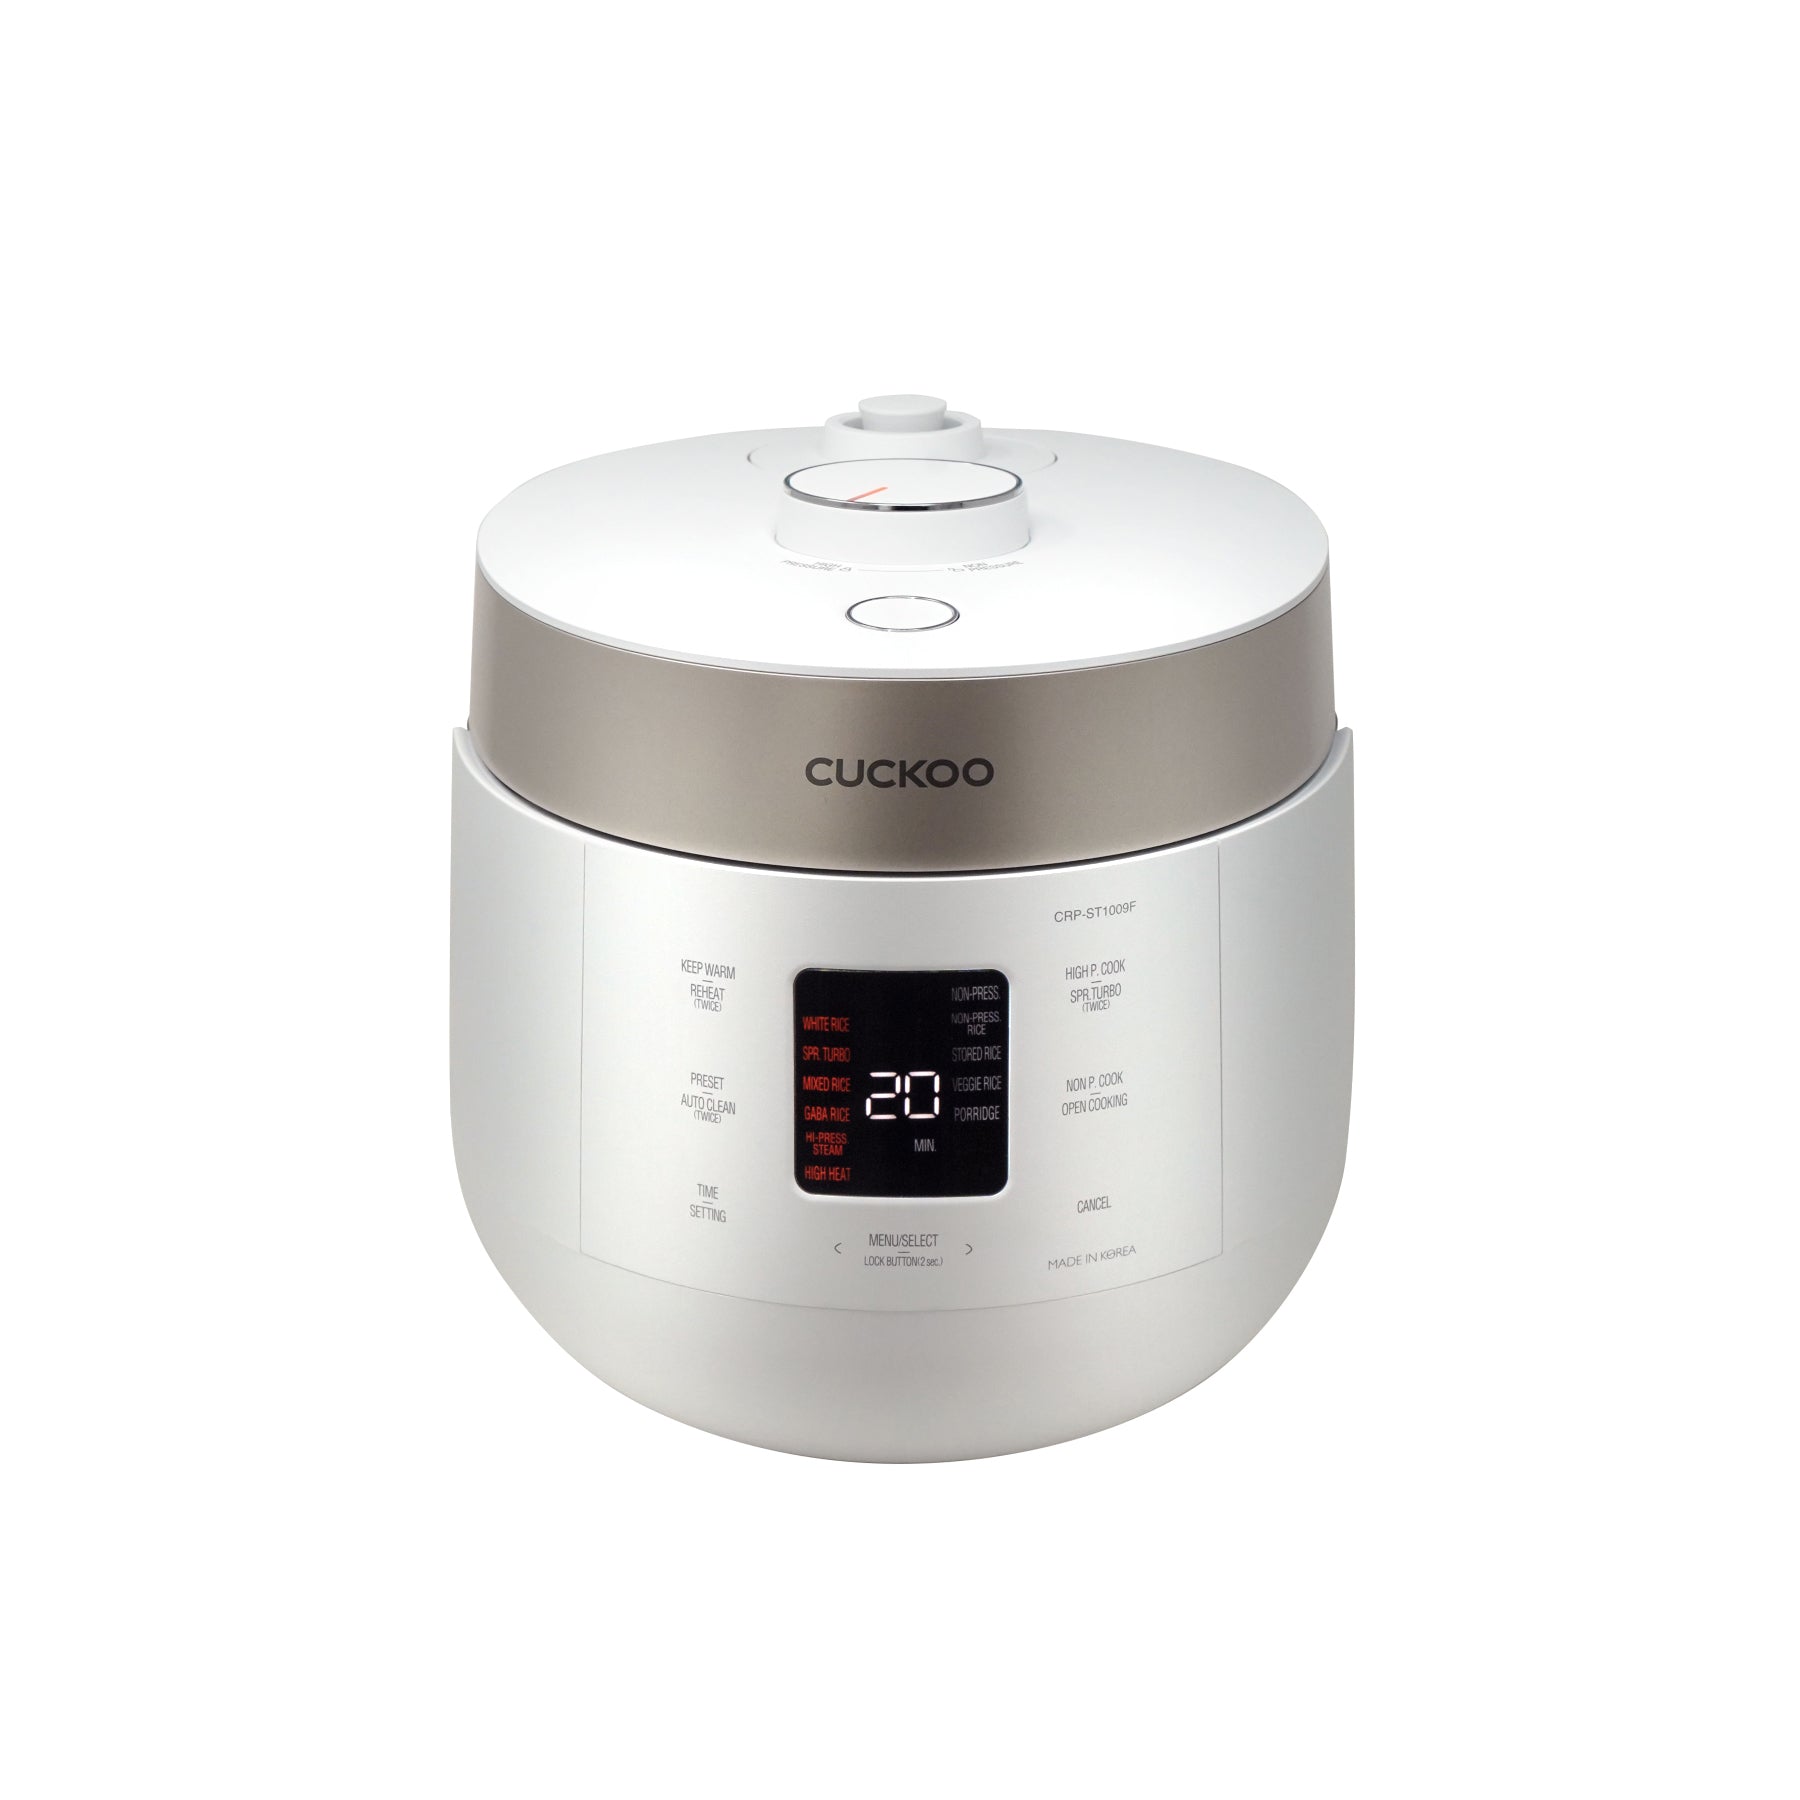 Buy Cuckoo CRP-CHSS1009FN Rice cooker White, Gold